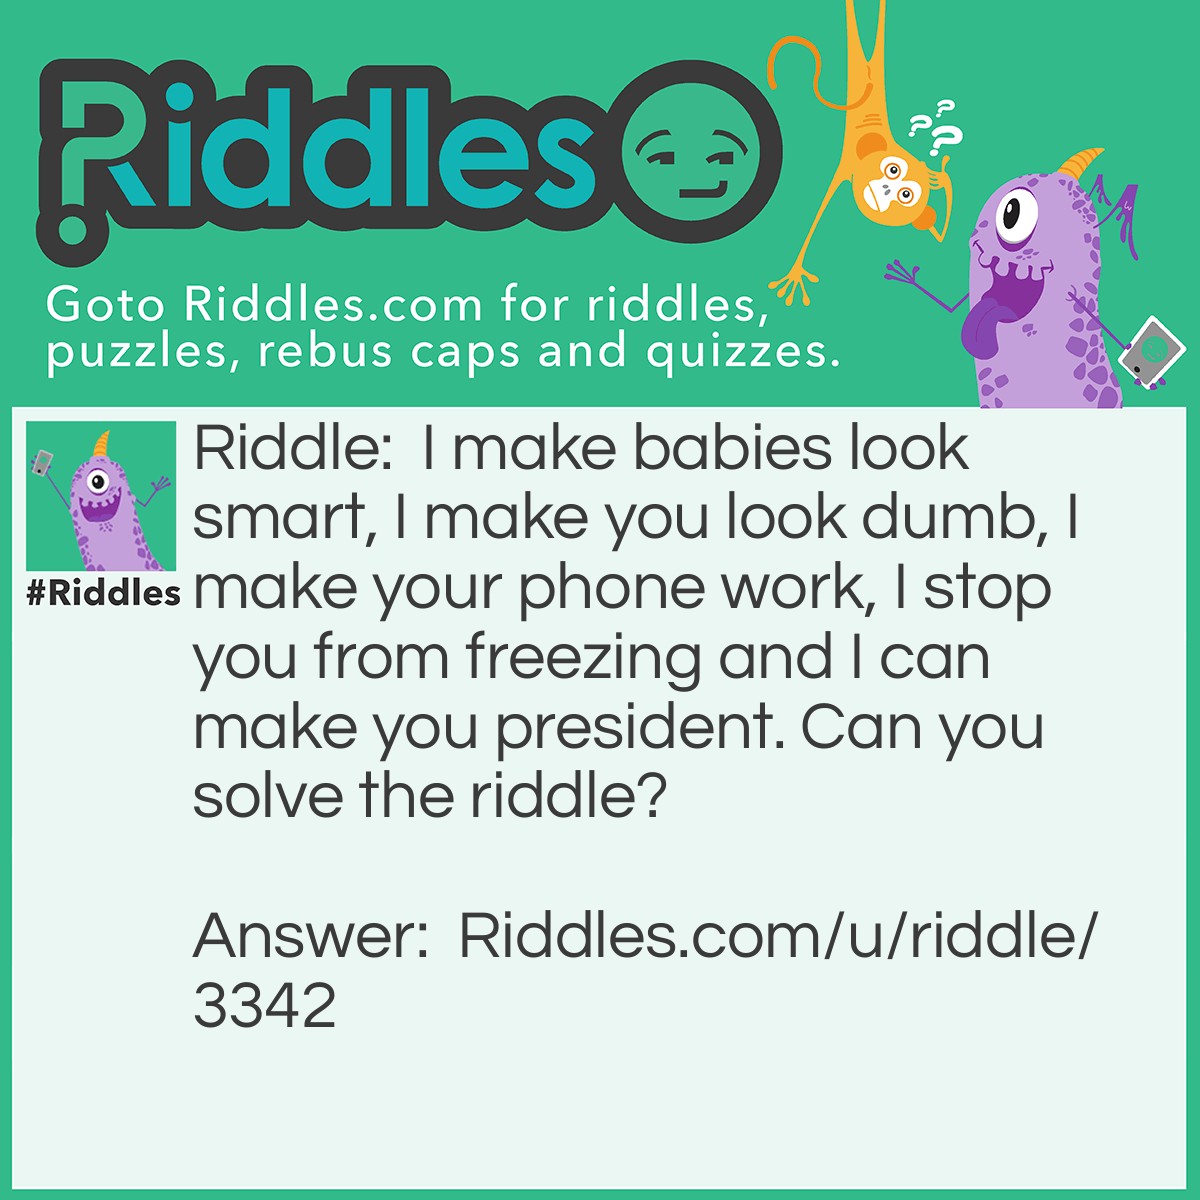 Riddle: I make babies look smart, I make you look dumb, I make your phone work, I stop you from freezing and I can make you president. Can you solve the <a href="https://www.riddles.com">riddle</a>? Answer: The answer is no because the question was 'Can you solve the riddle?'